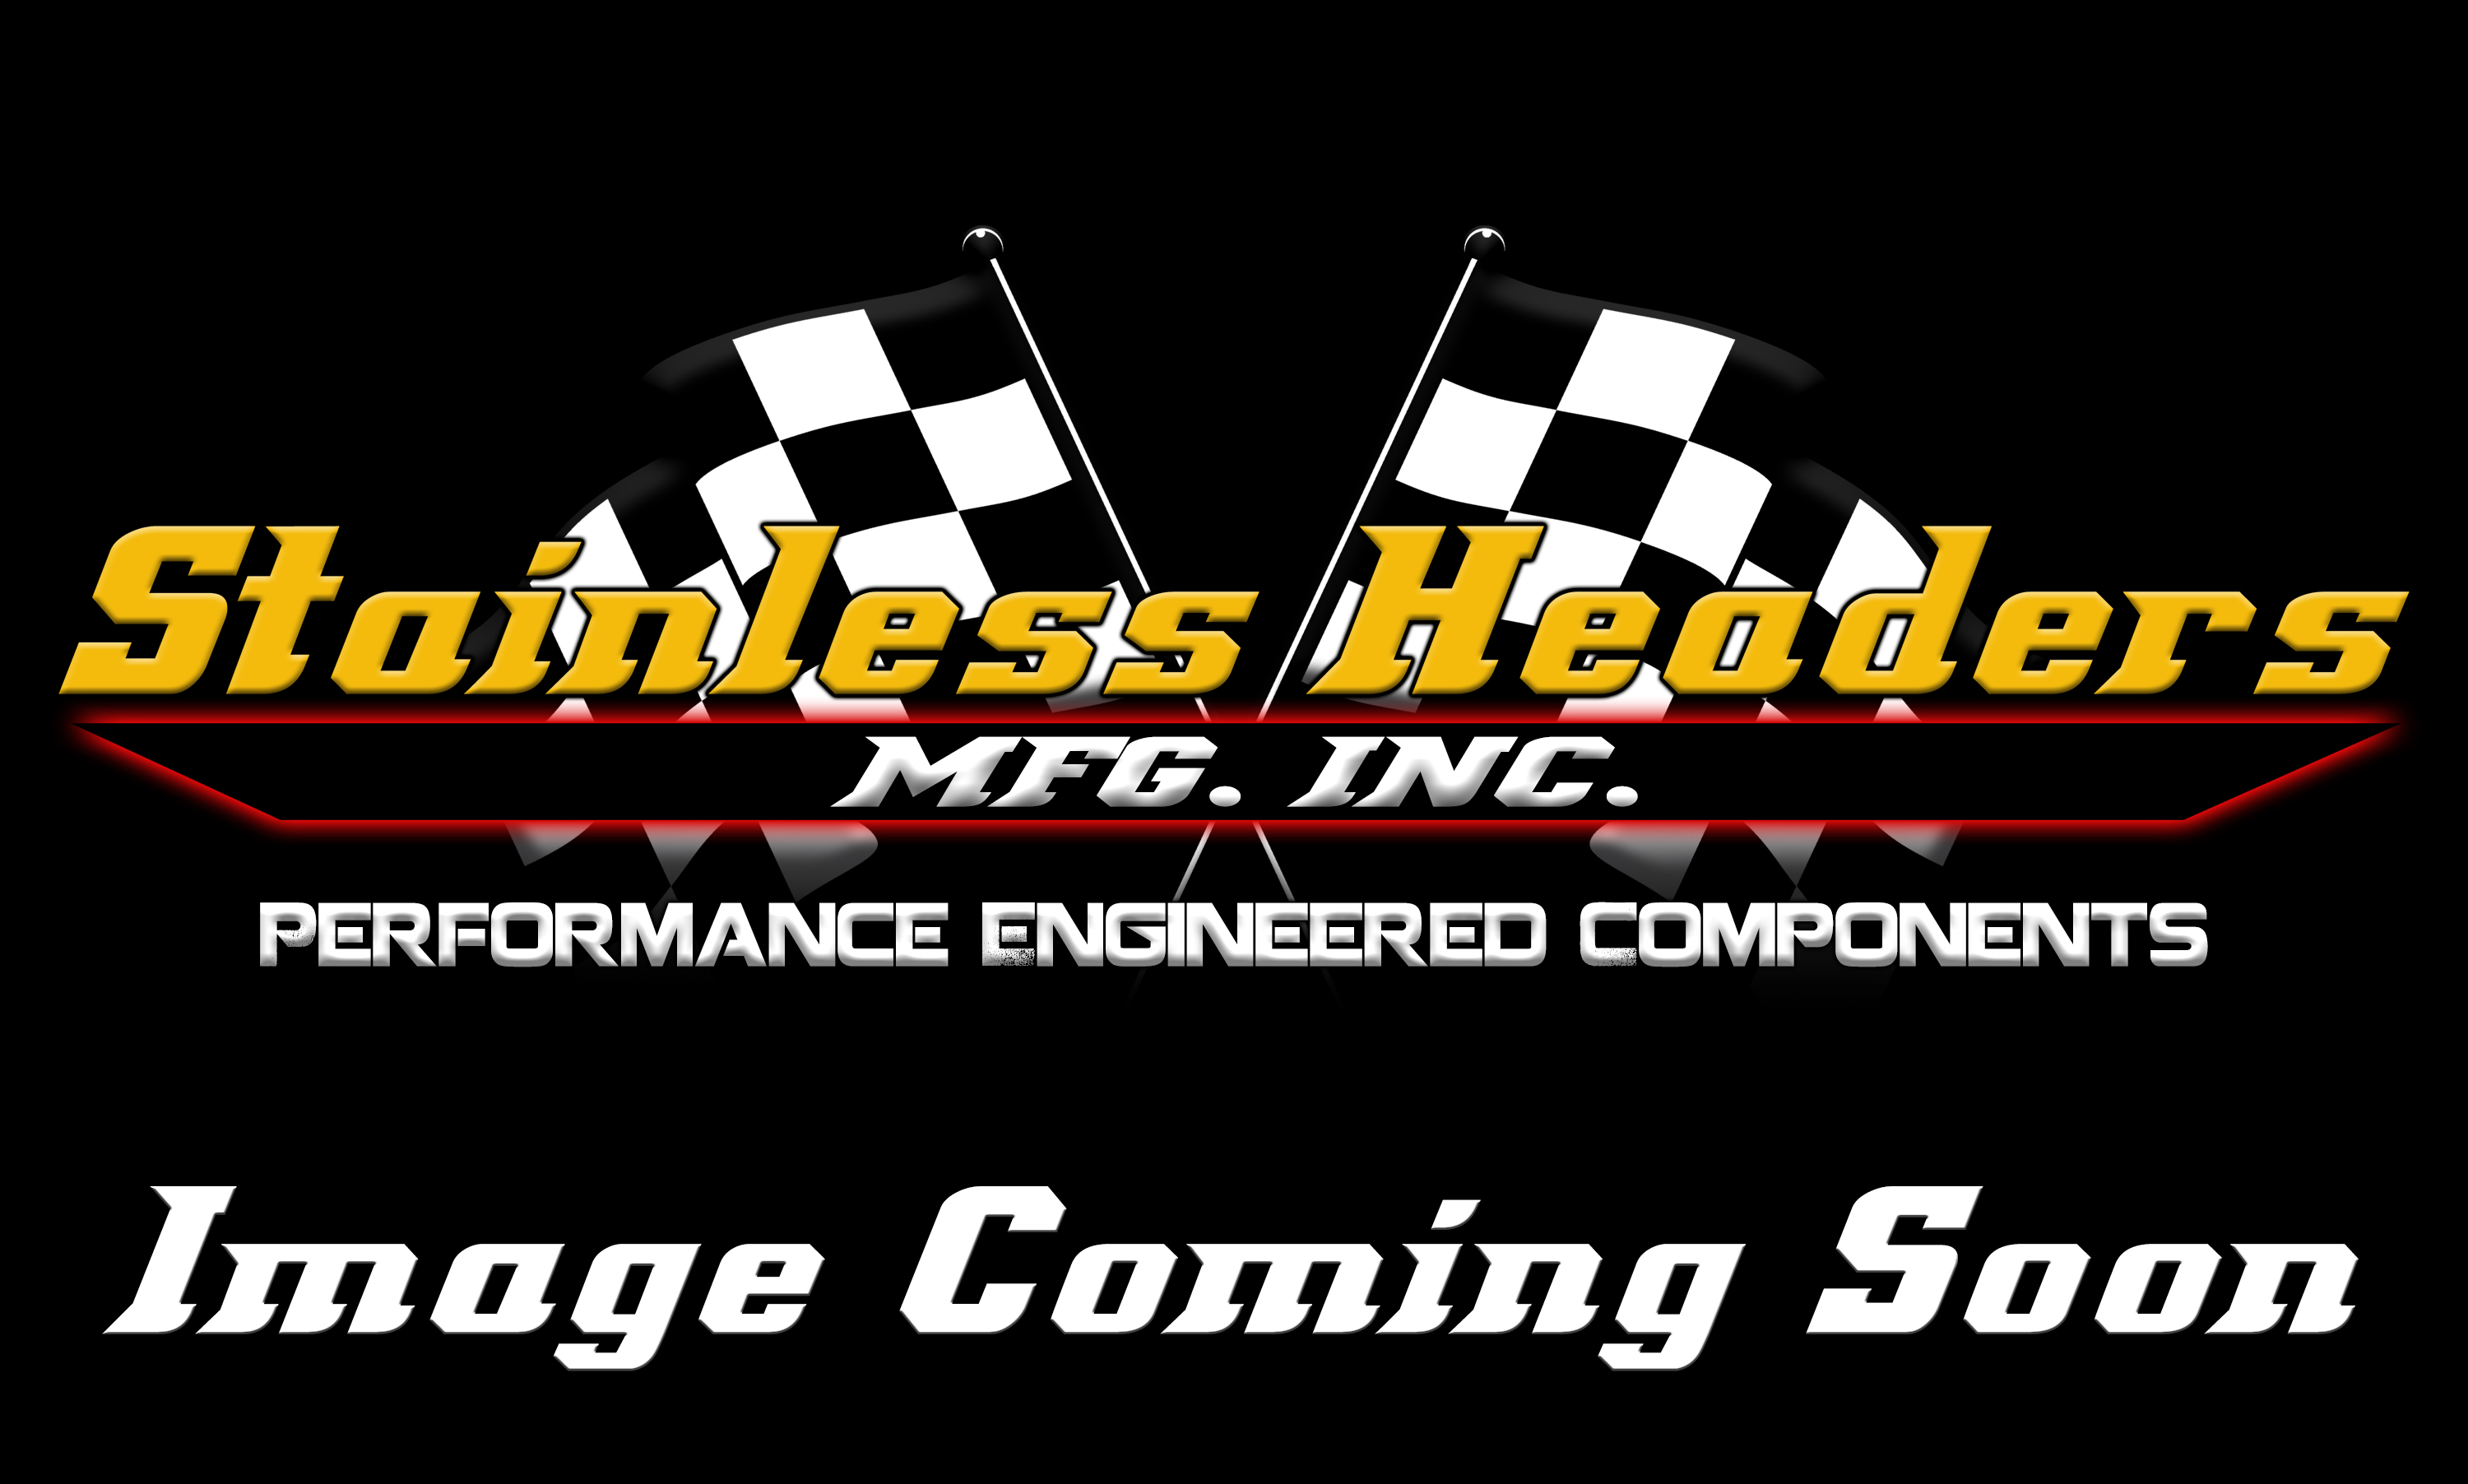 CompTurbo Technology Turbochargers - Comp Turbo Journal Bearing Turbochargers - CompTurbo Technologies - CTR4828R-8890 Mid Frame 360 Journal Bearing Turbocharger (1850 HP)